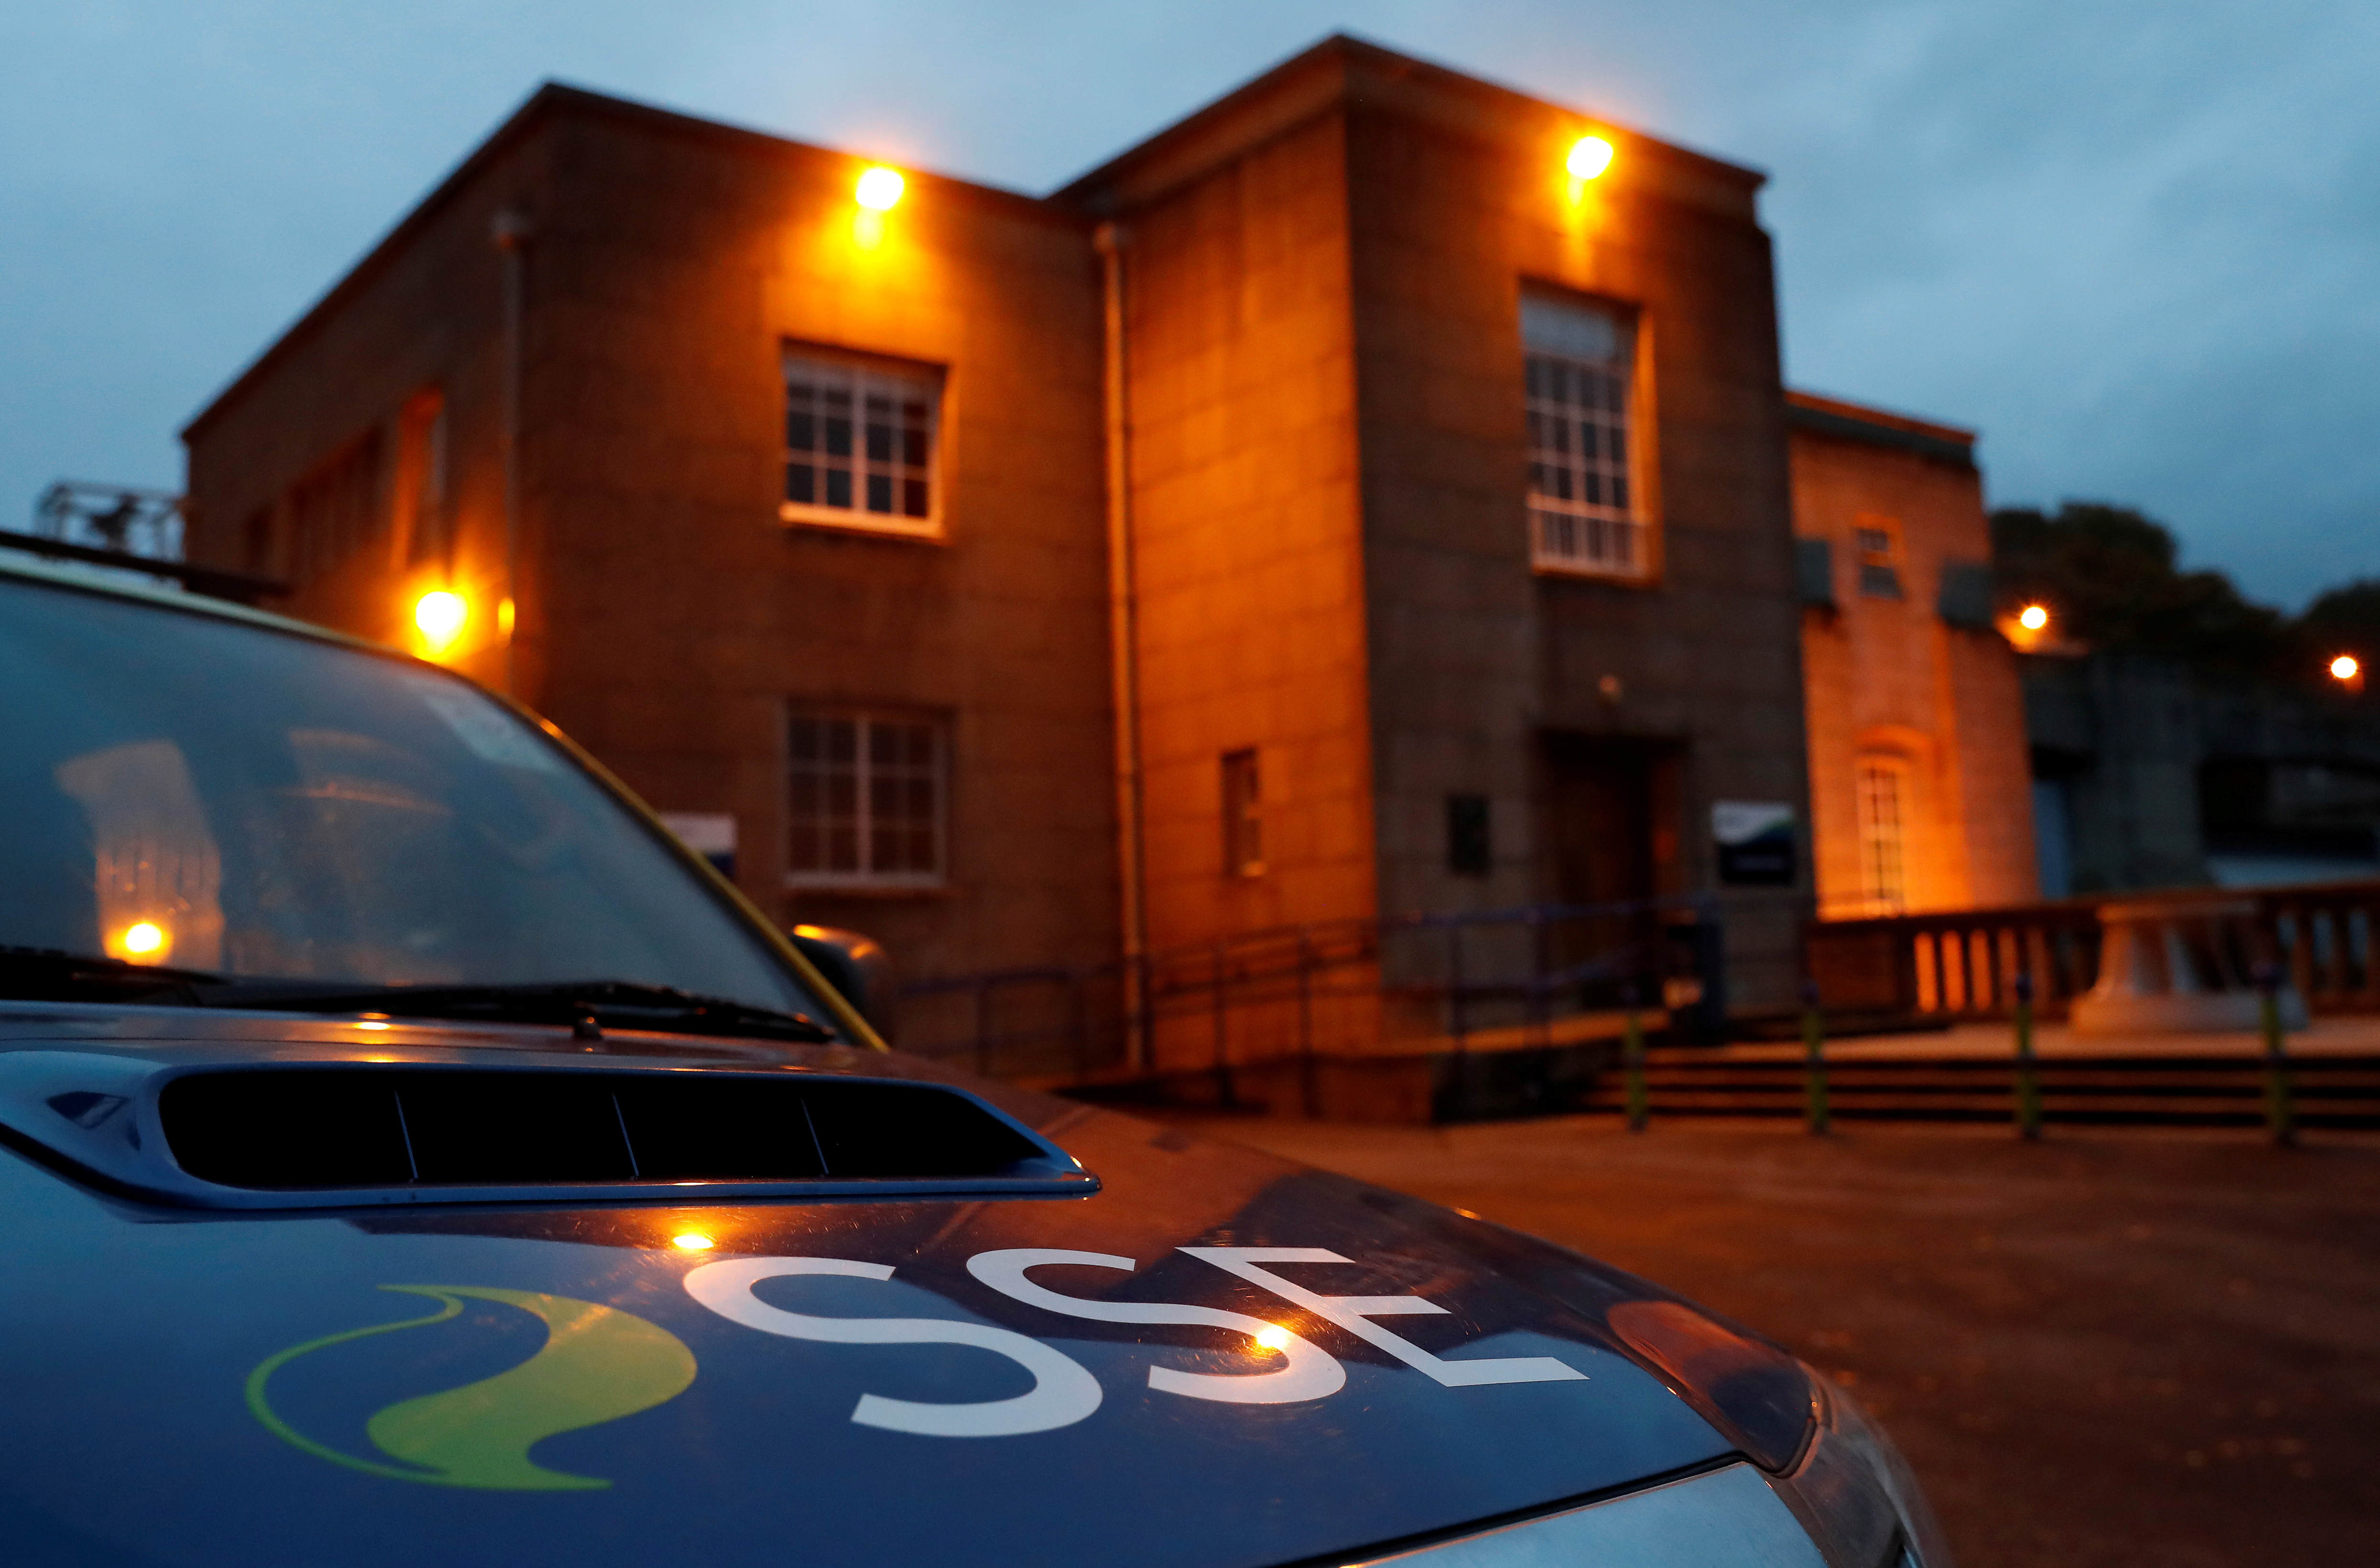 An SSE vehicle is parked outside the Pitlochry Dam hydro electric power station in Pitlochry